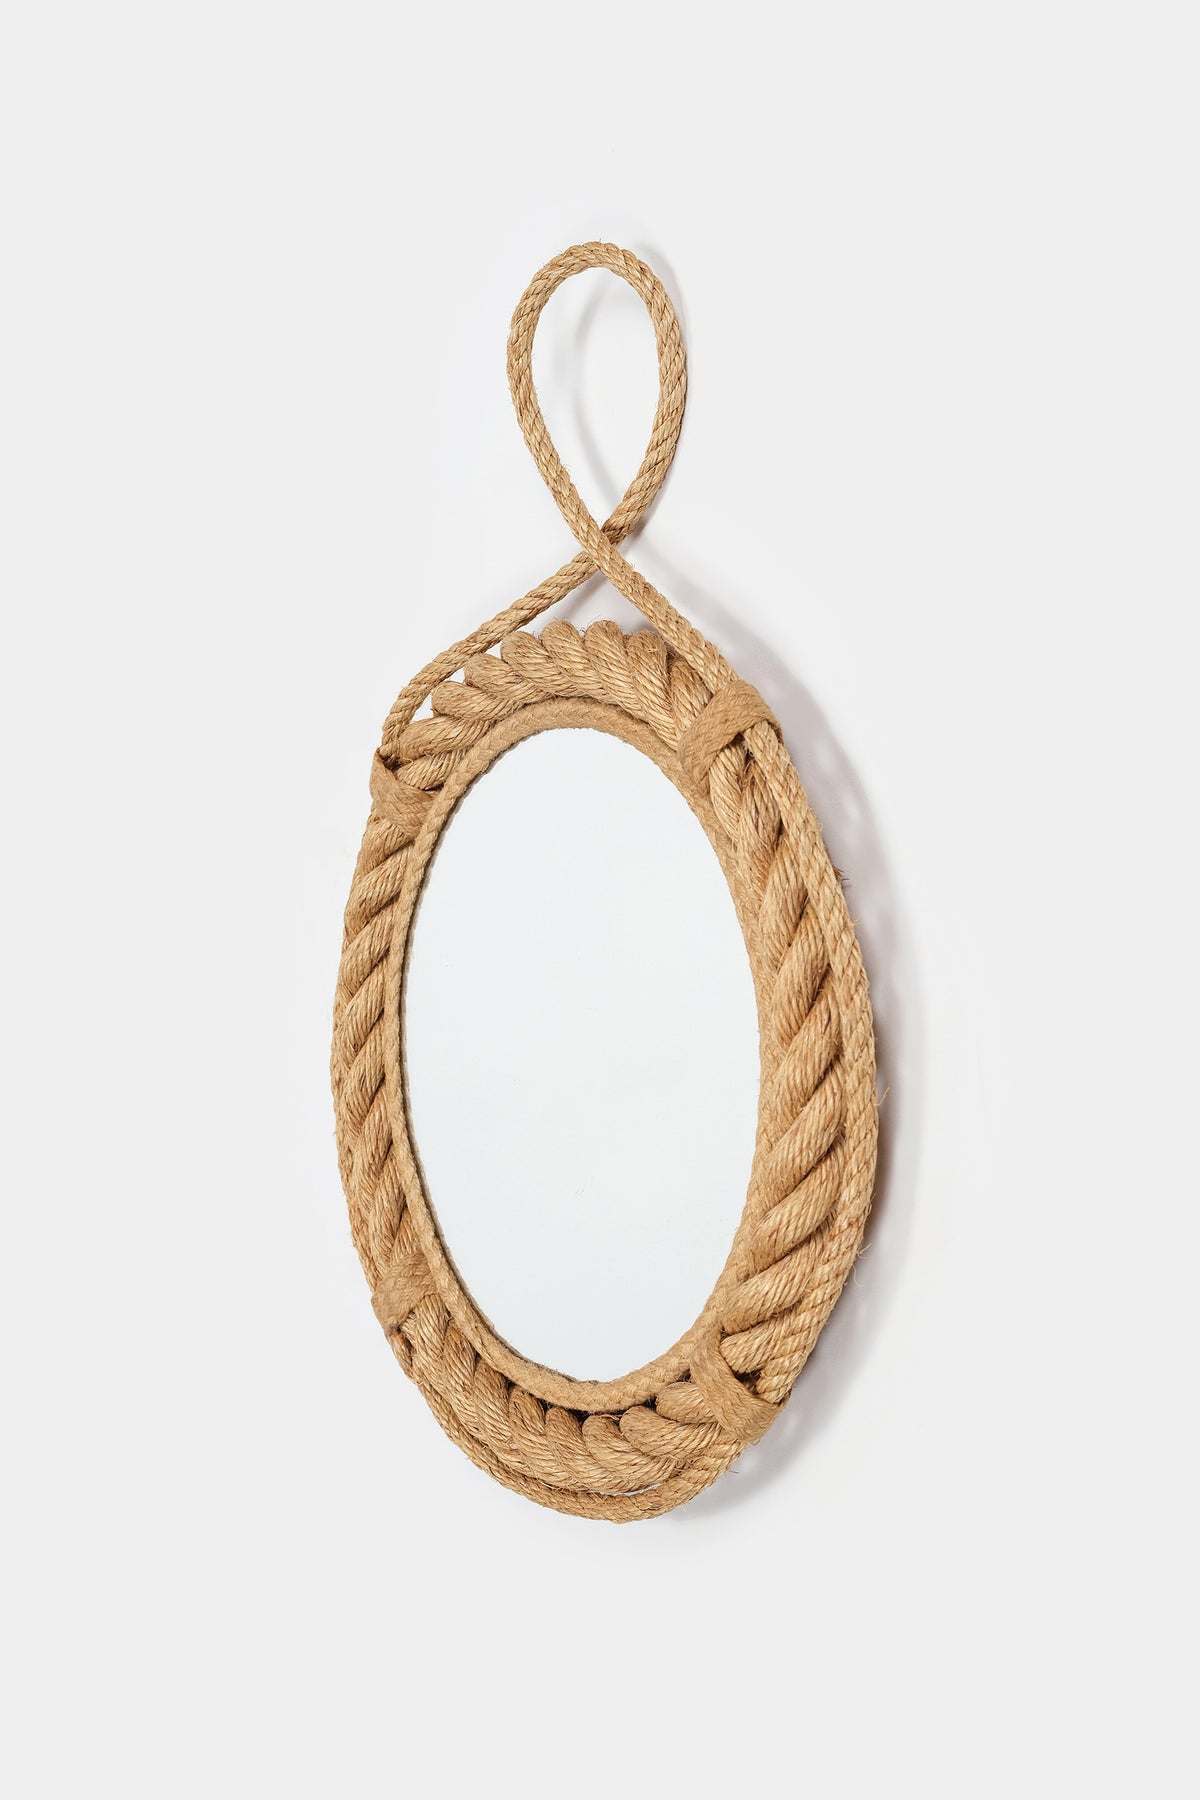 Adrien Audoux and Frida Minet, Mirror with Rope Frame, France, 50s